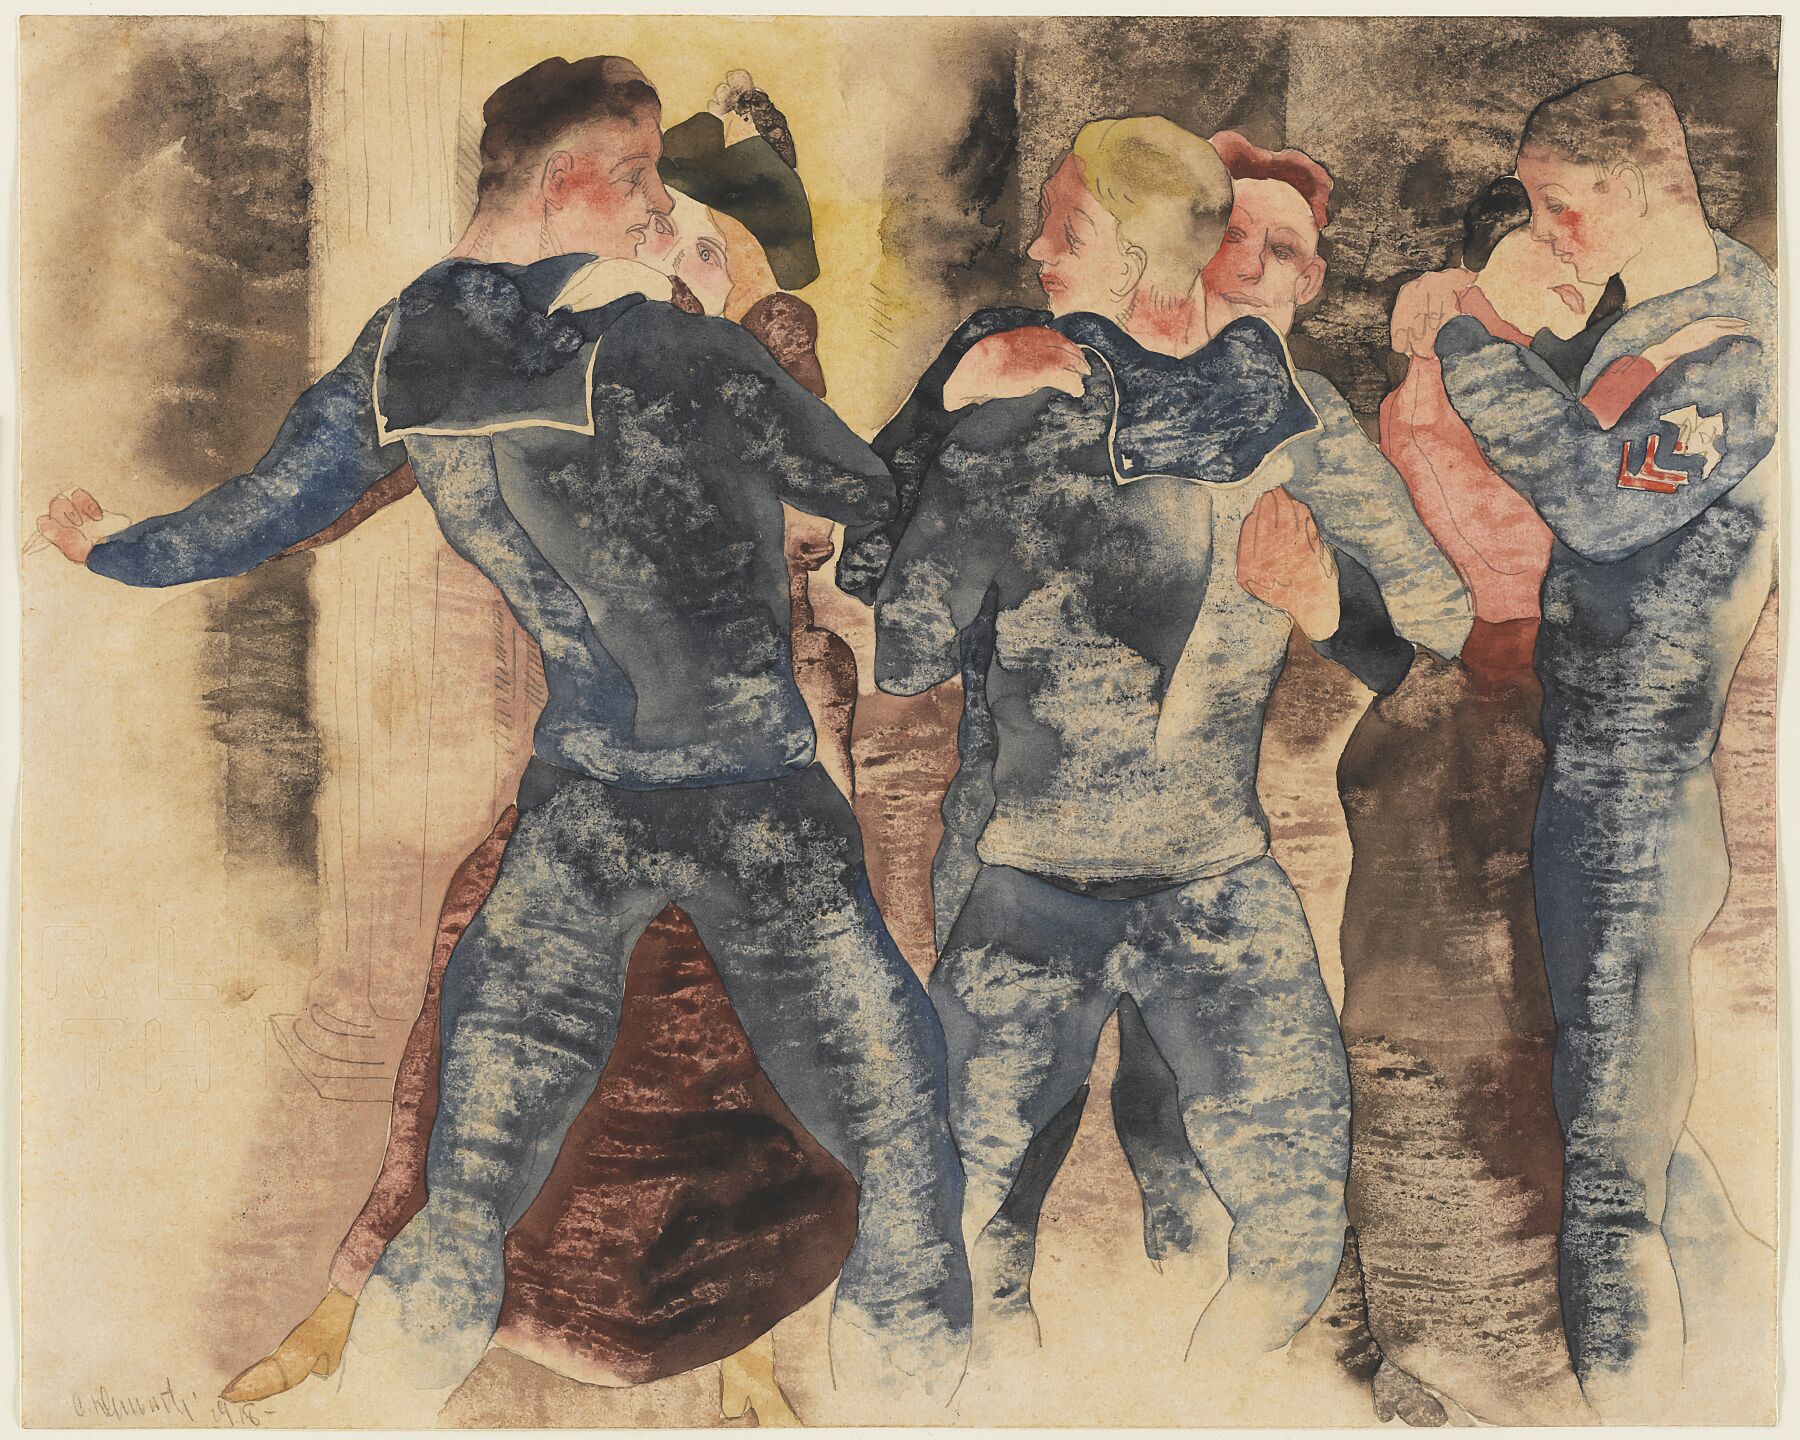 Dancing Sailors by Charles Demuth - 1918